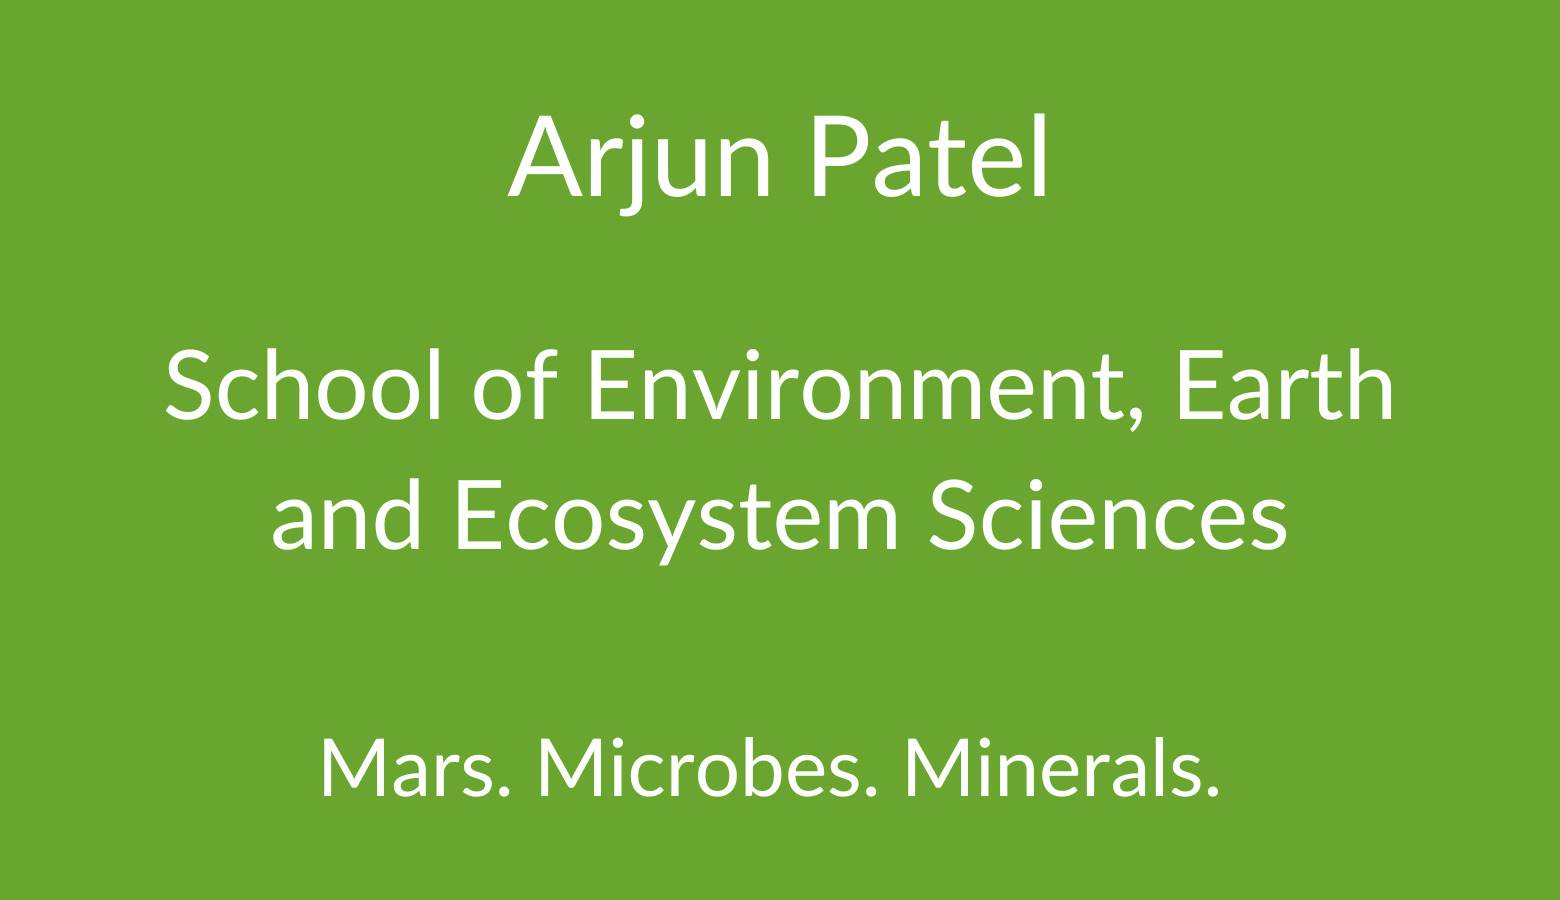 Arjun Patel. School of Environment, Earth and Ecosystem Sciences. Mars. Microbes. Minerals.